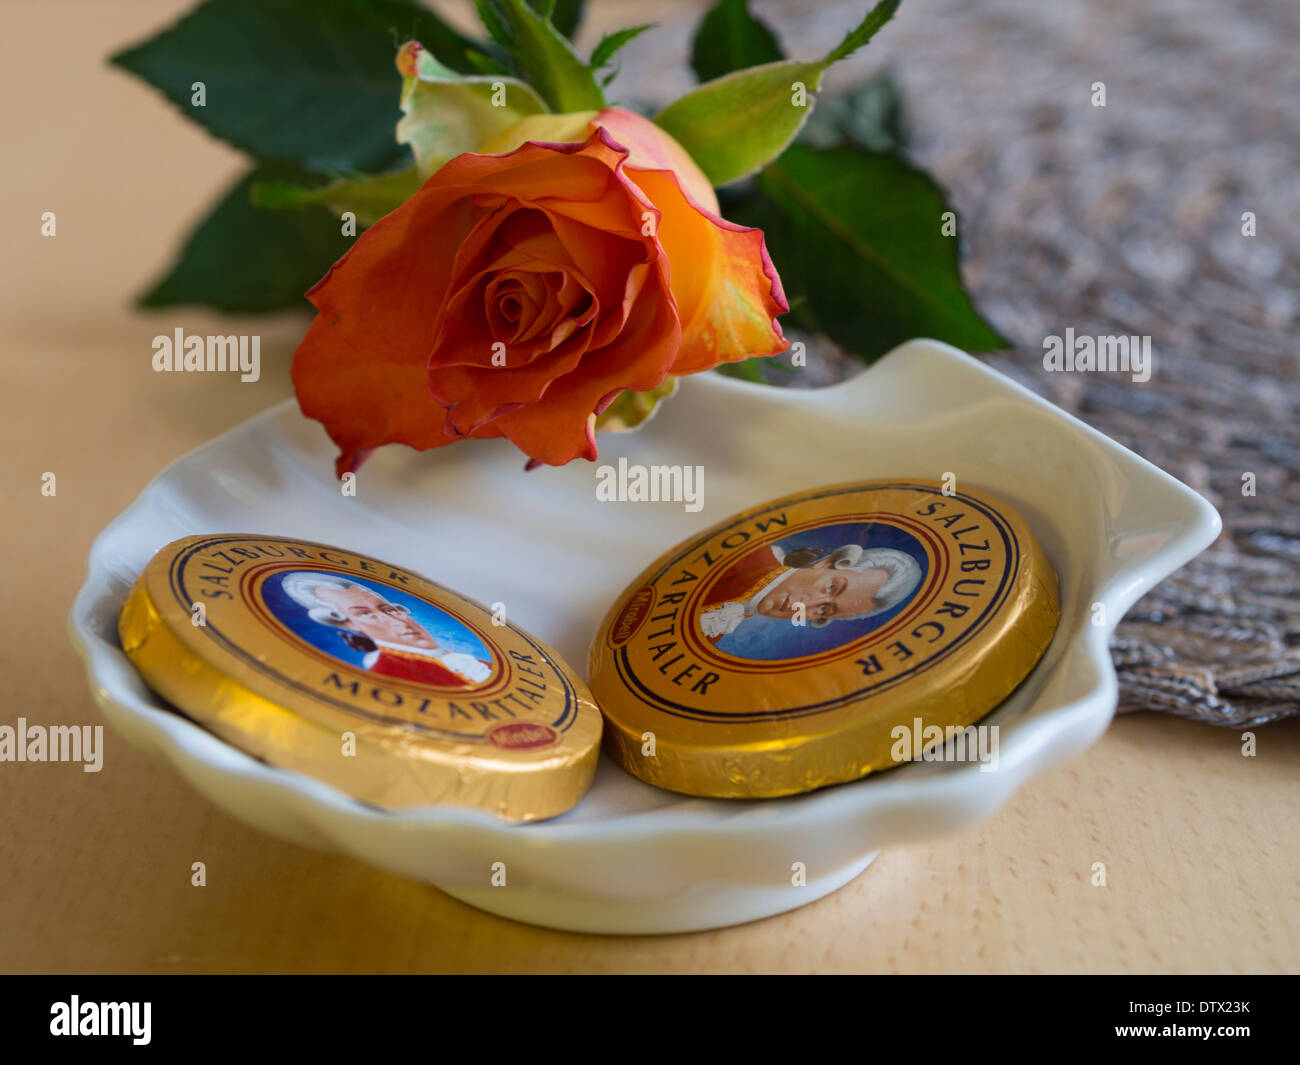 Two Mozarttaler with a Rose. Two famous Salzburger chocolate candies in a dish with an orange rose. Stock Photo